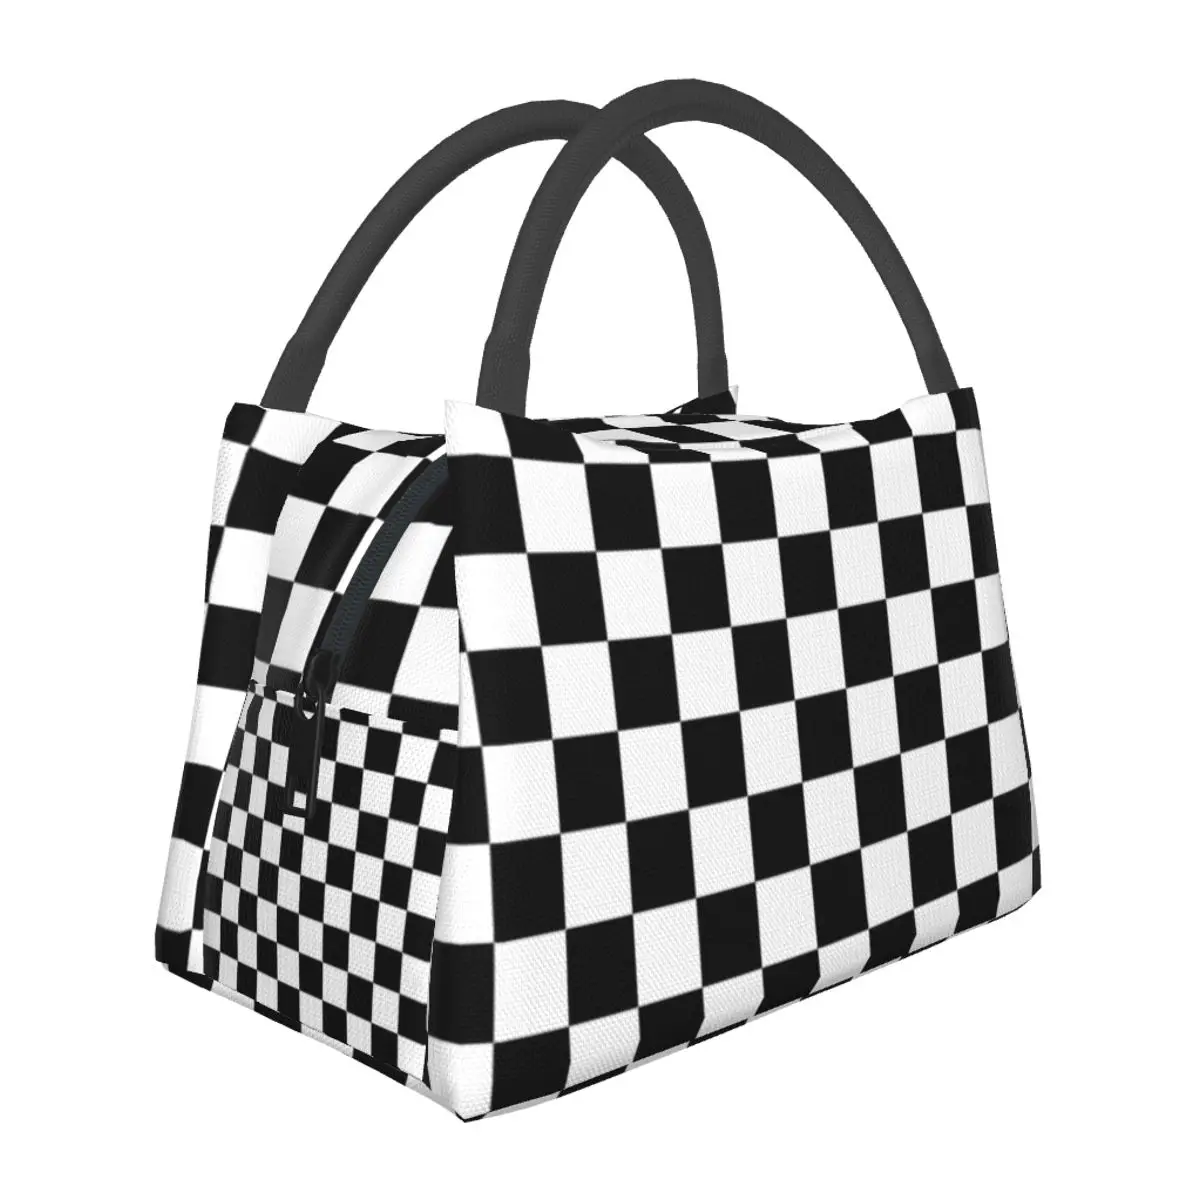 Black Checkerboard Lunch Bag Classic Black and White Checker Lunch Box Office Graphic Cooler Bag Funny Waterproof Tote Food Bags